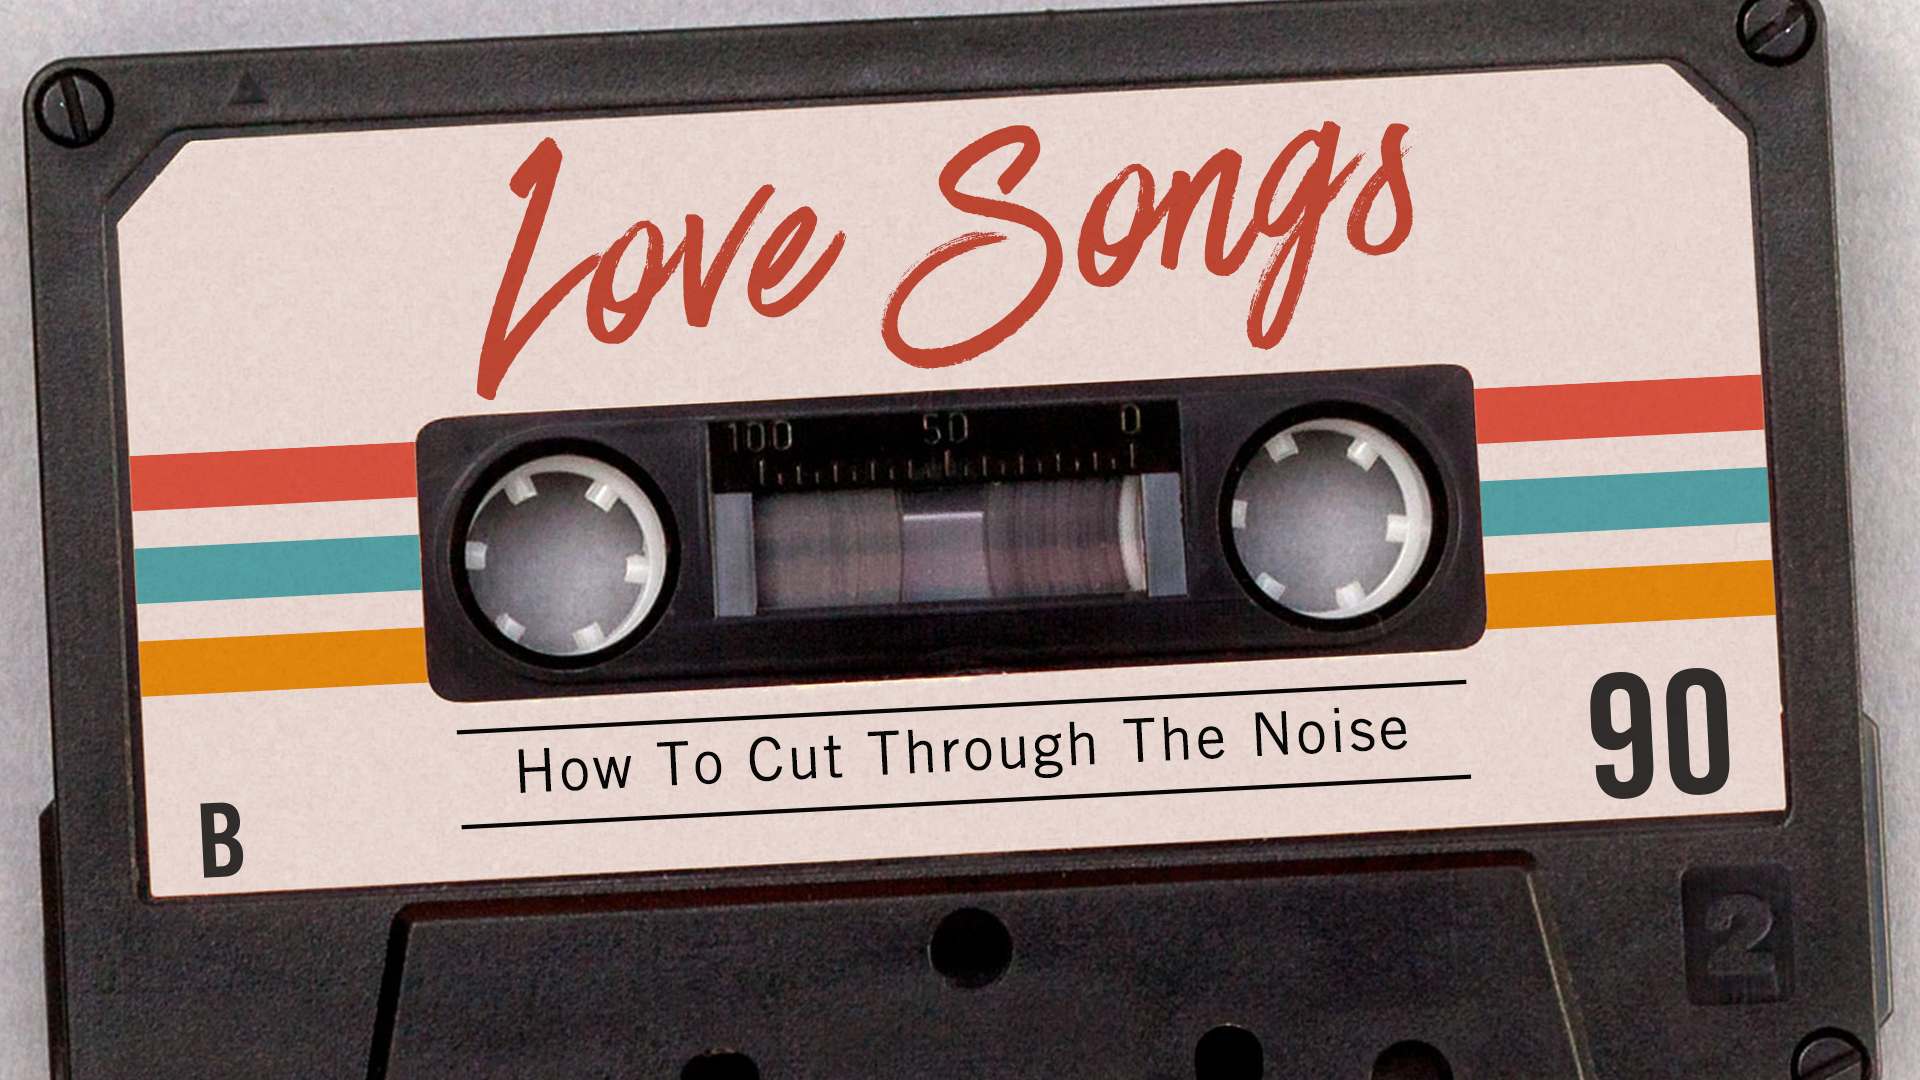 Love Songs: How to cut through the noise